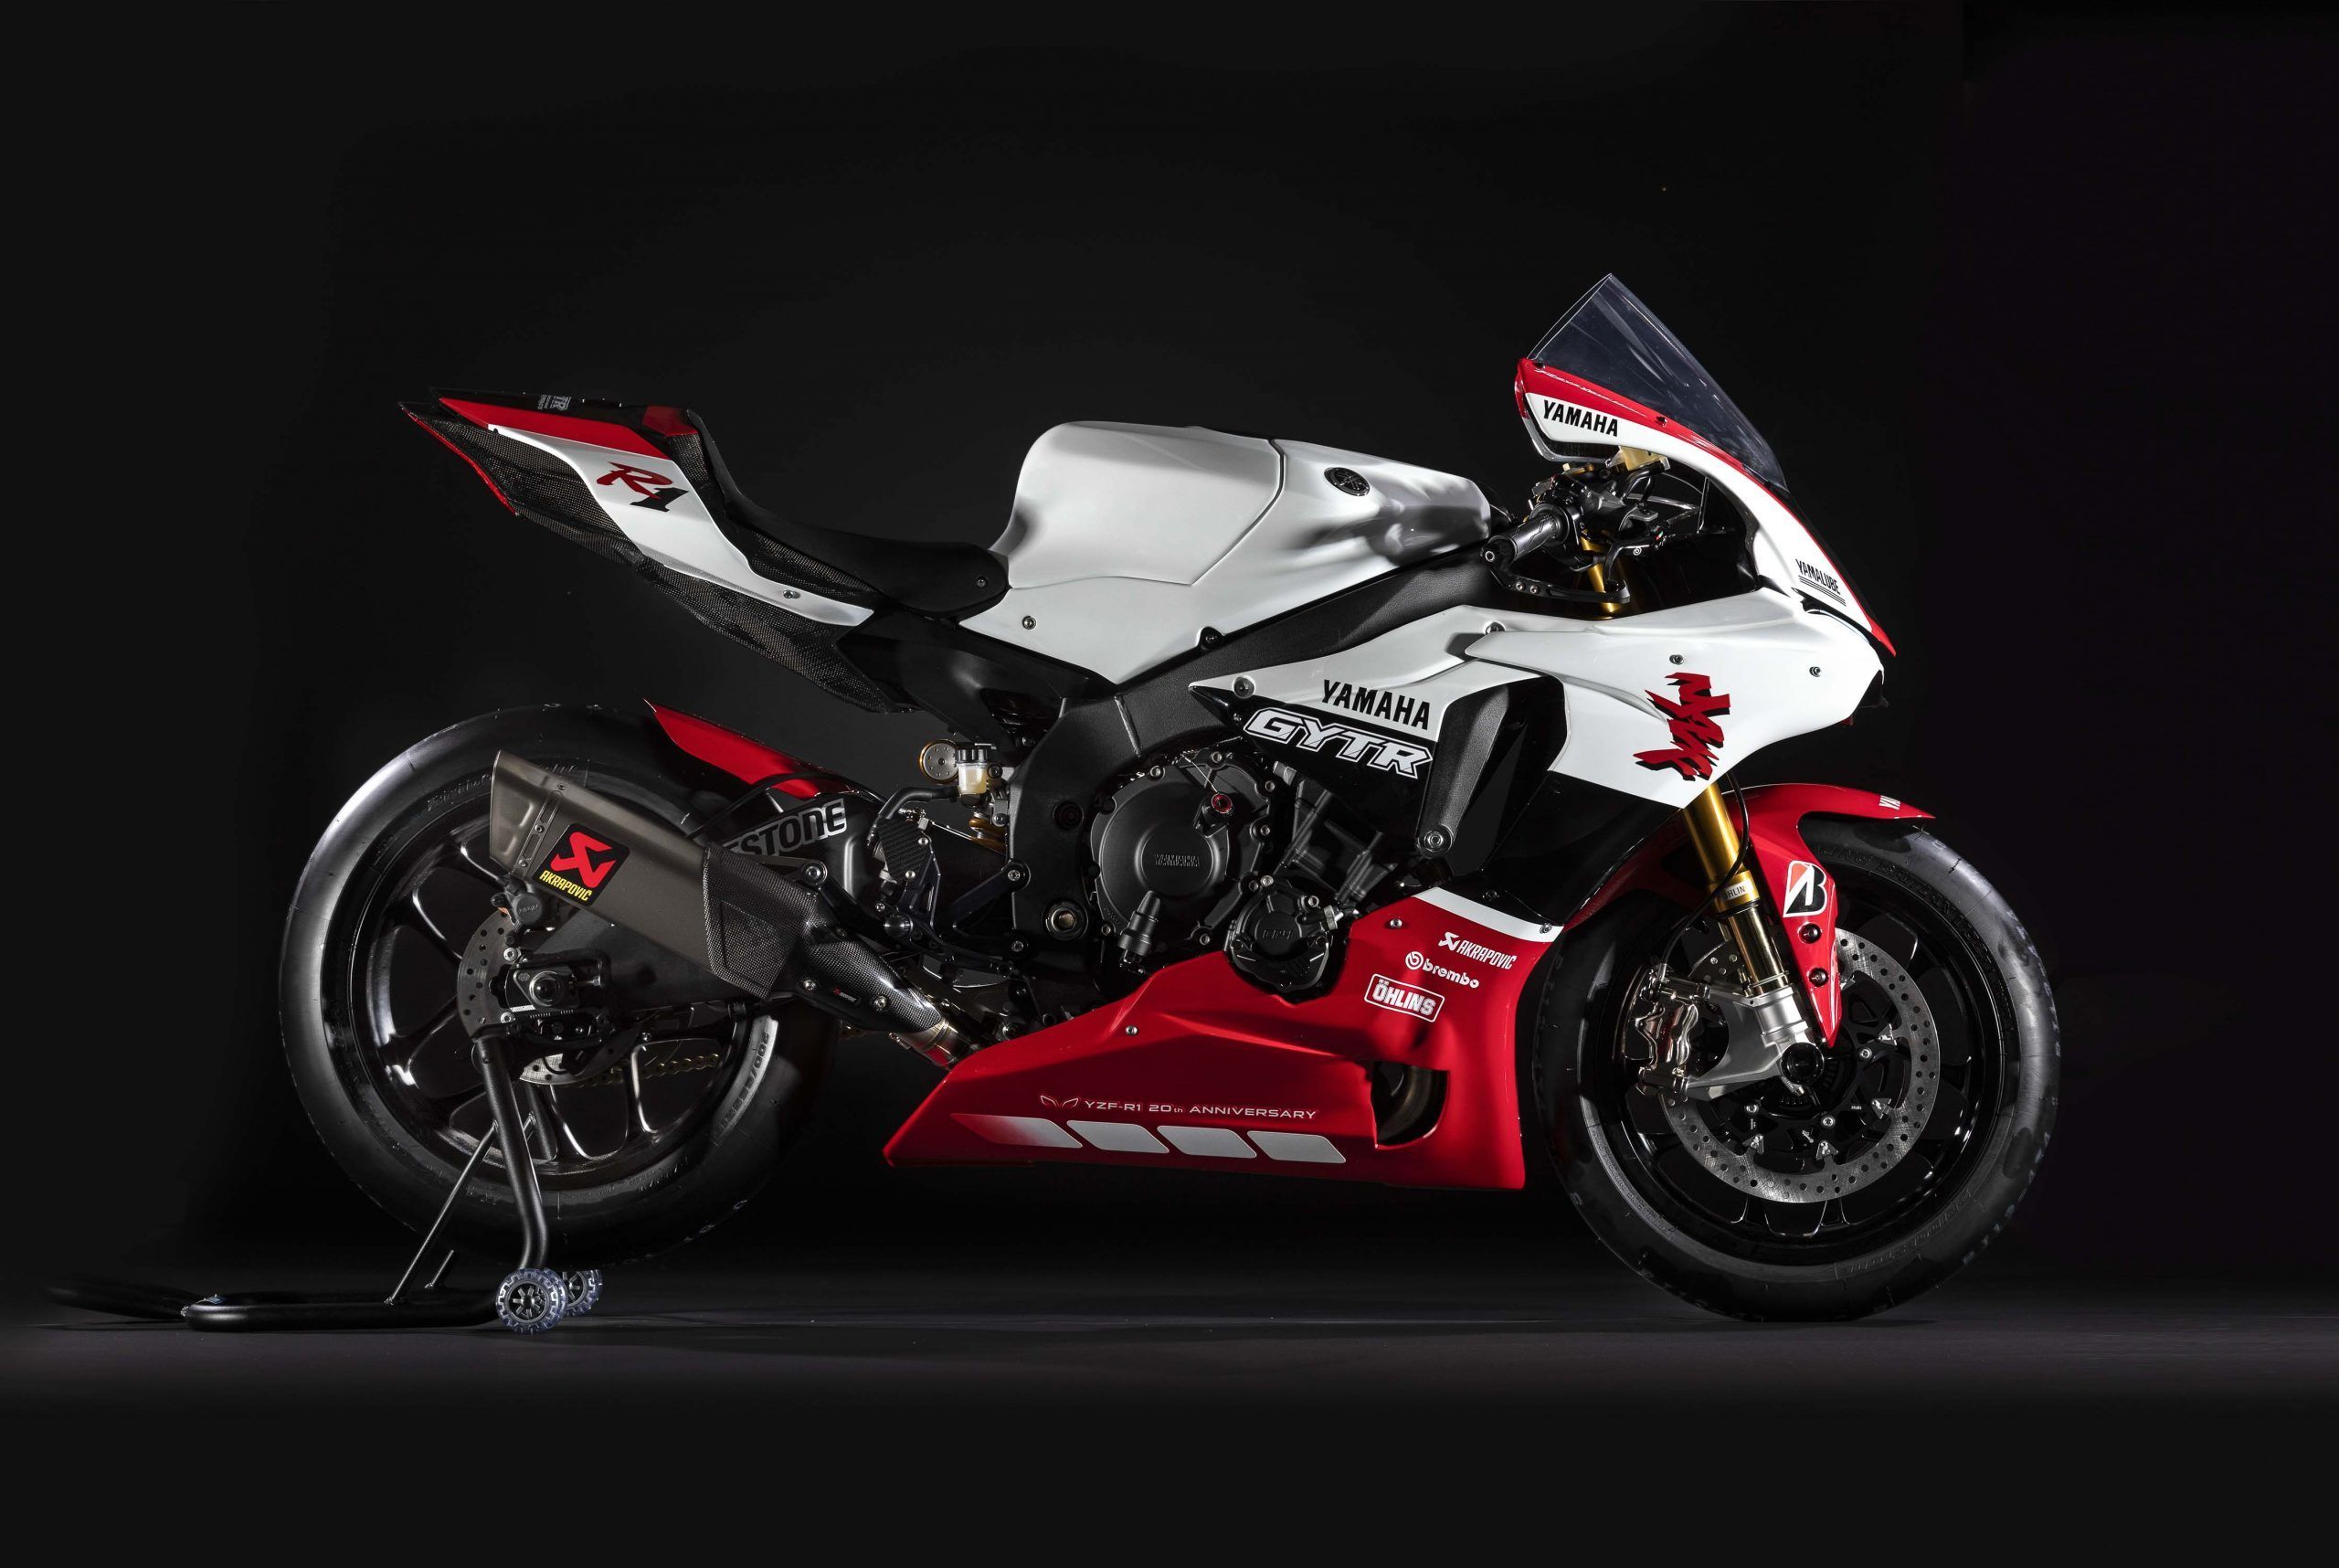 The Yamaha YZF R1 GYTR Superbike Celebrates 20 Years Of The R So Only 20 Will Be Made Worldwide & Rubber